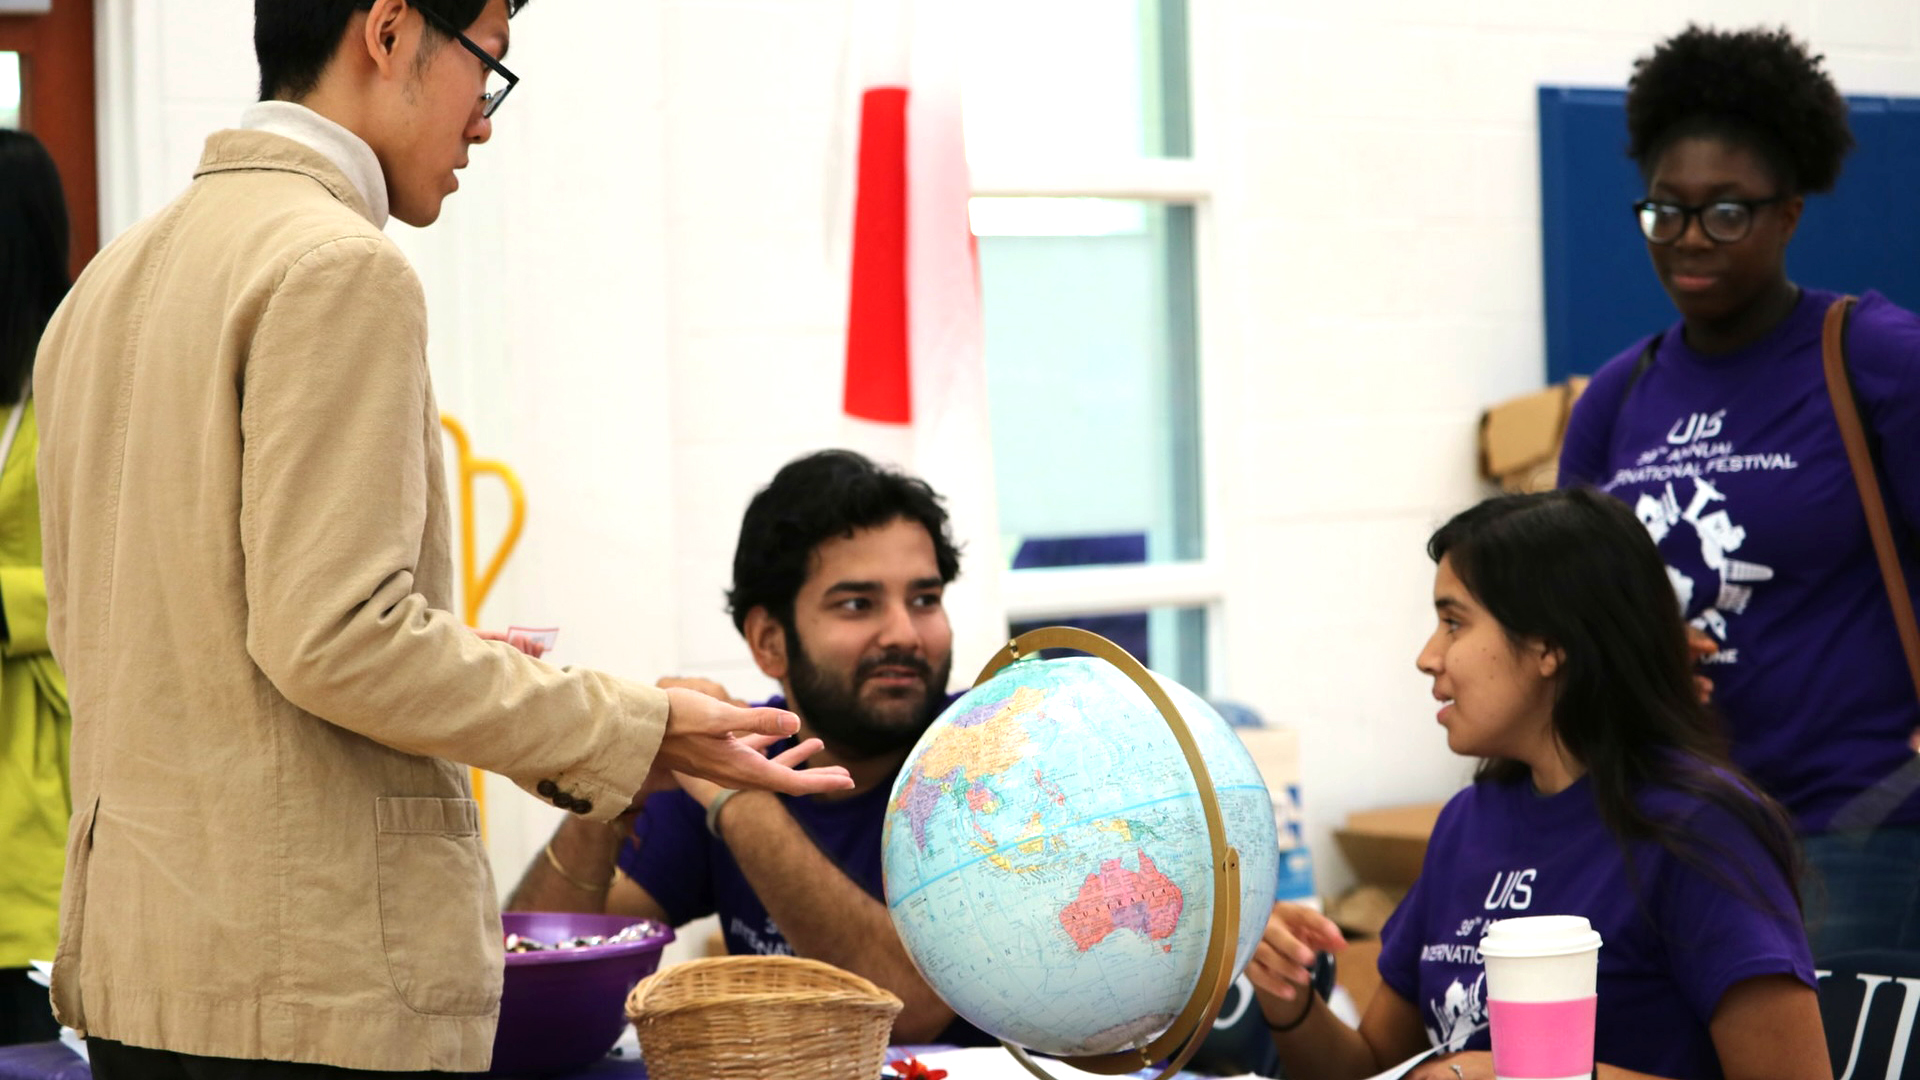 students talking at a table with a globe